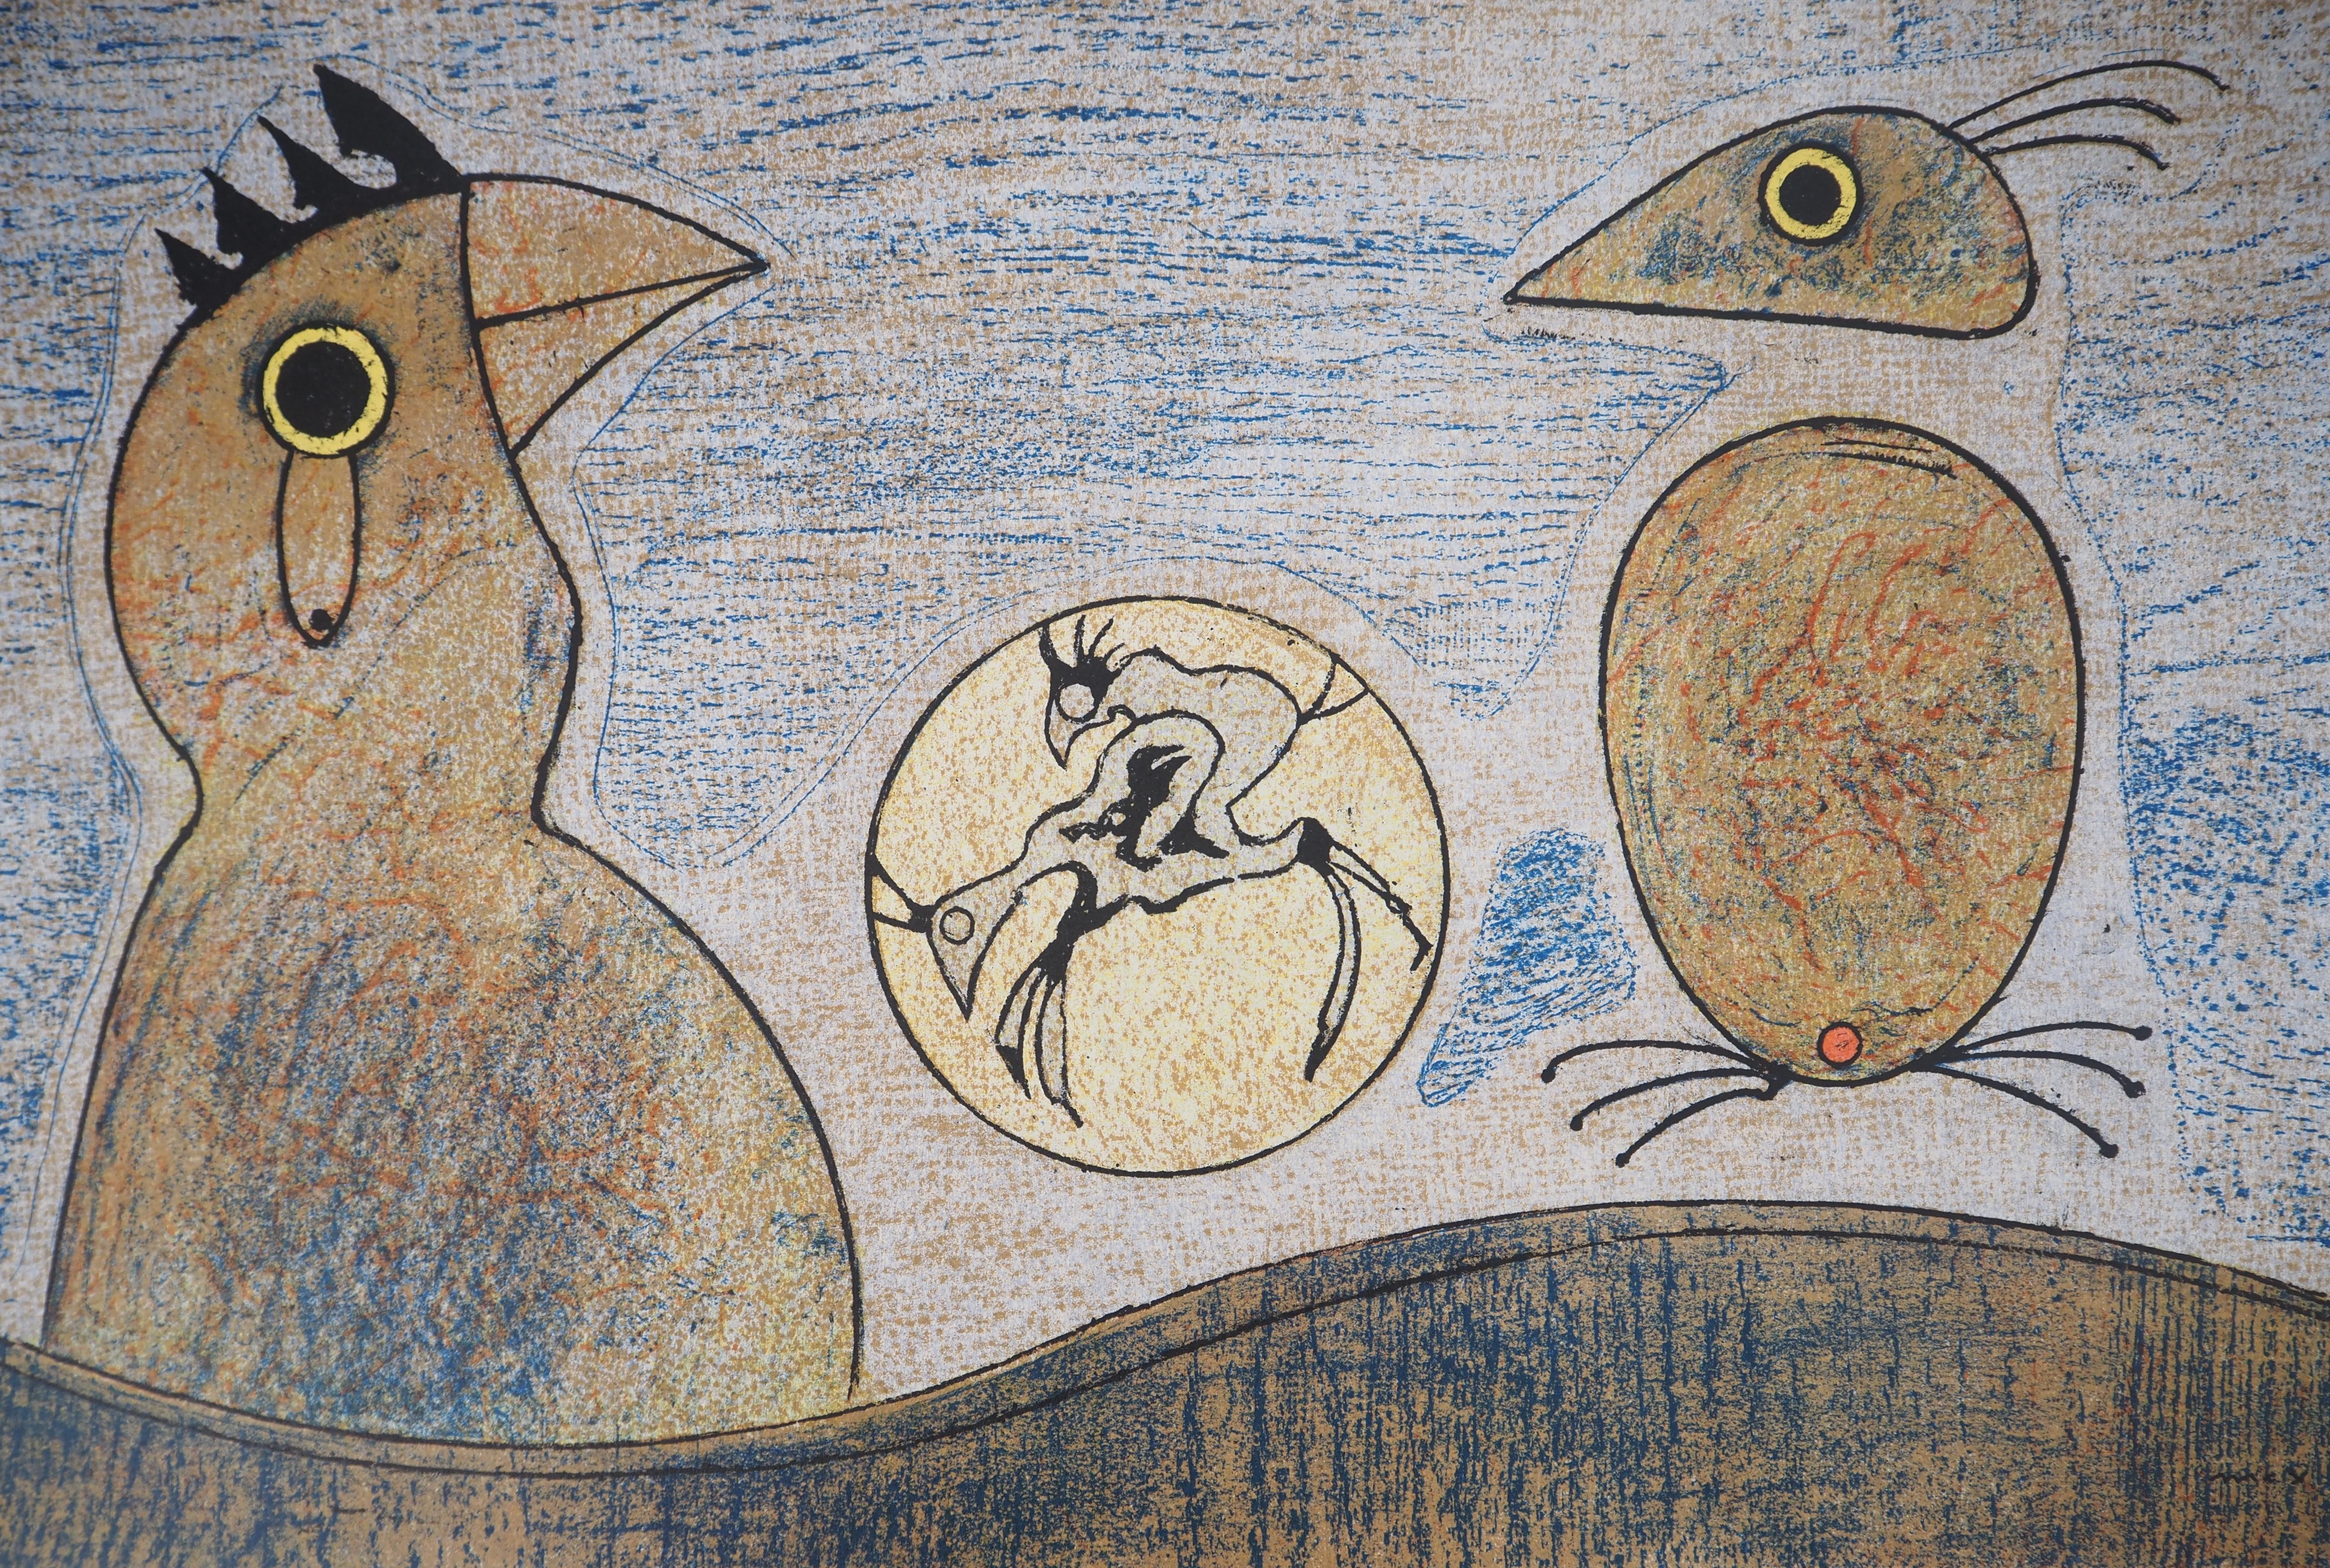 Surrealist Dream : Couple of Roosters - Original lithograph (Spies #p. 438) - Print by Max Ernst